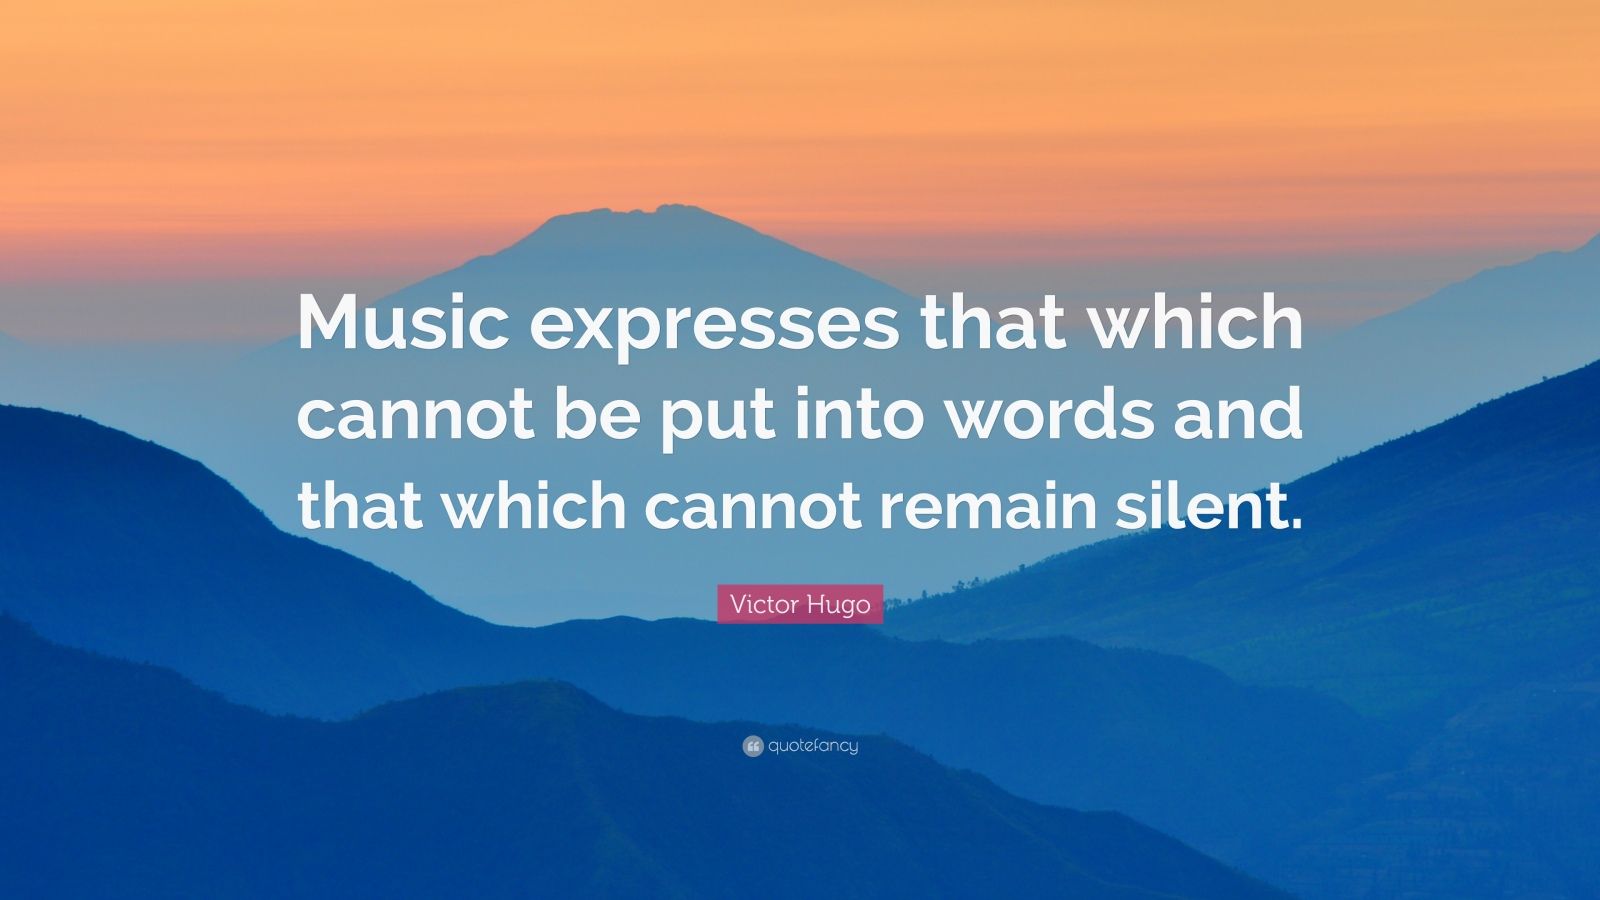 music expresses that which cannot be put into words and that